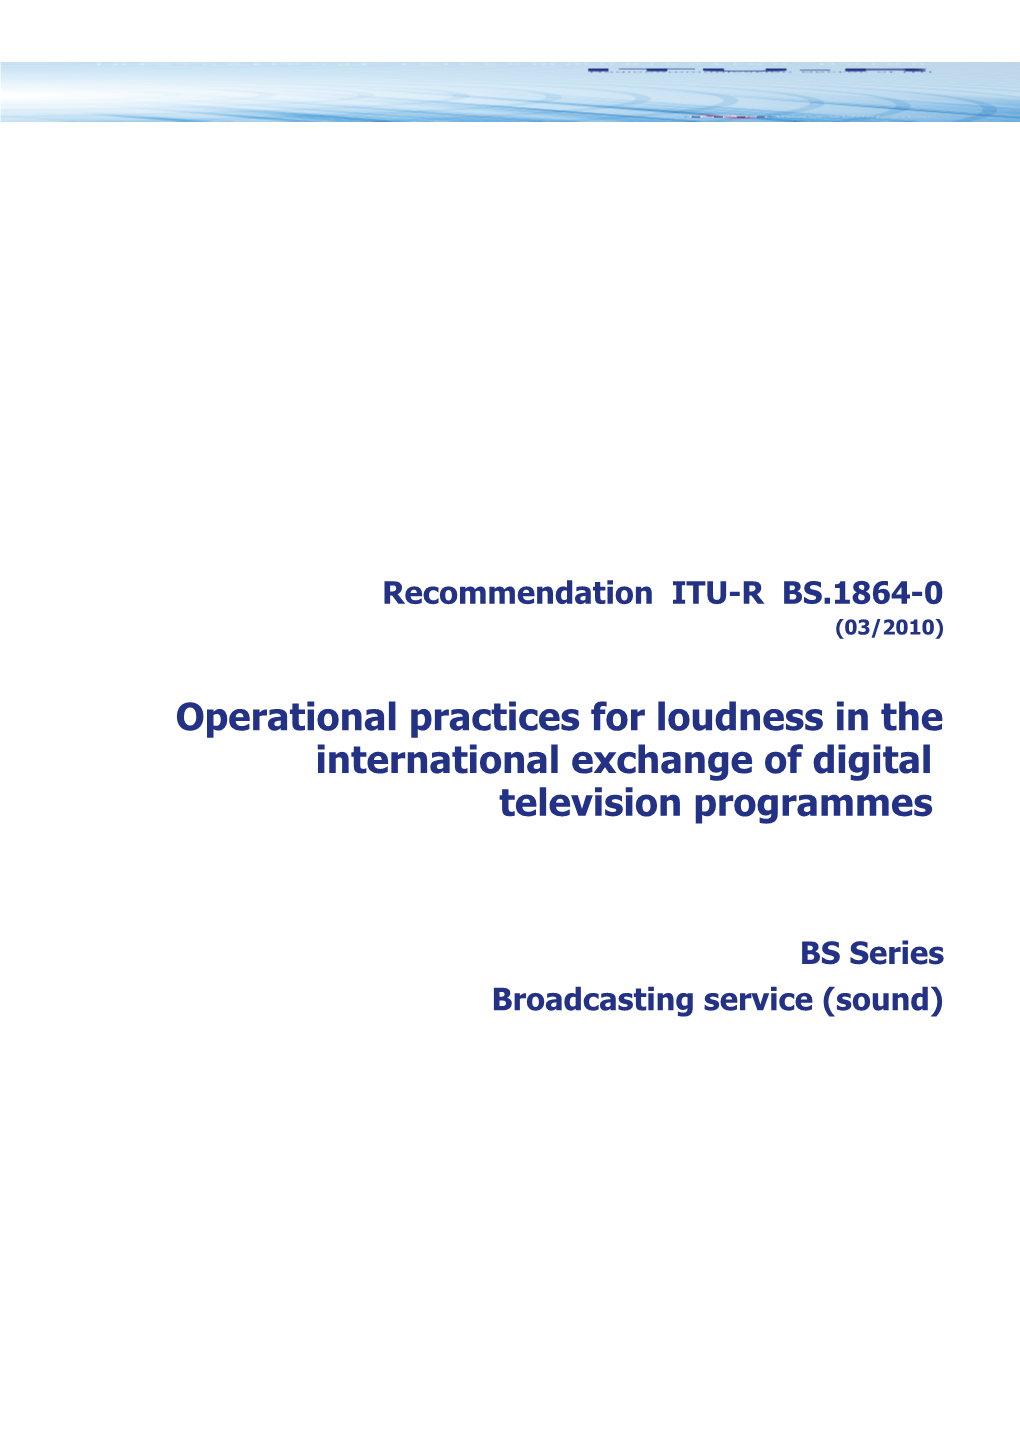 RECOMMENDATION ITU-R BS.1864* - Operational Practices for Loudness in the International